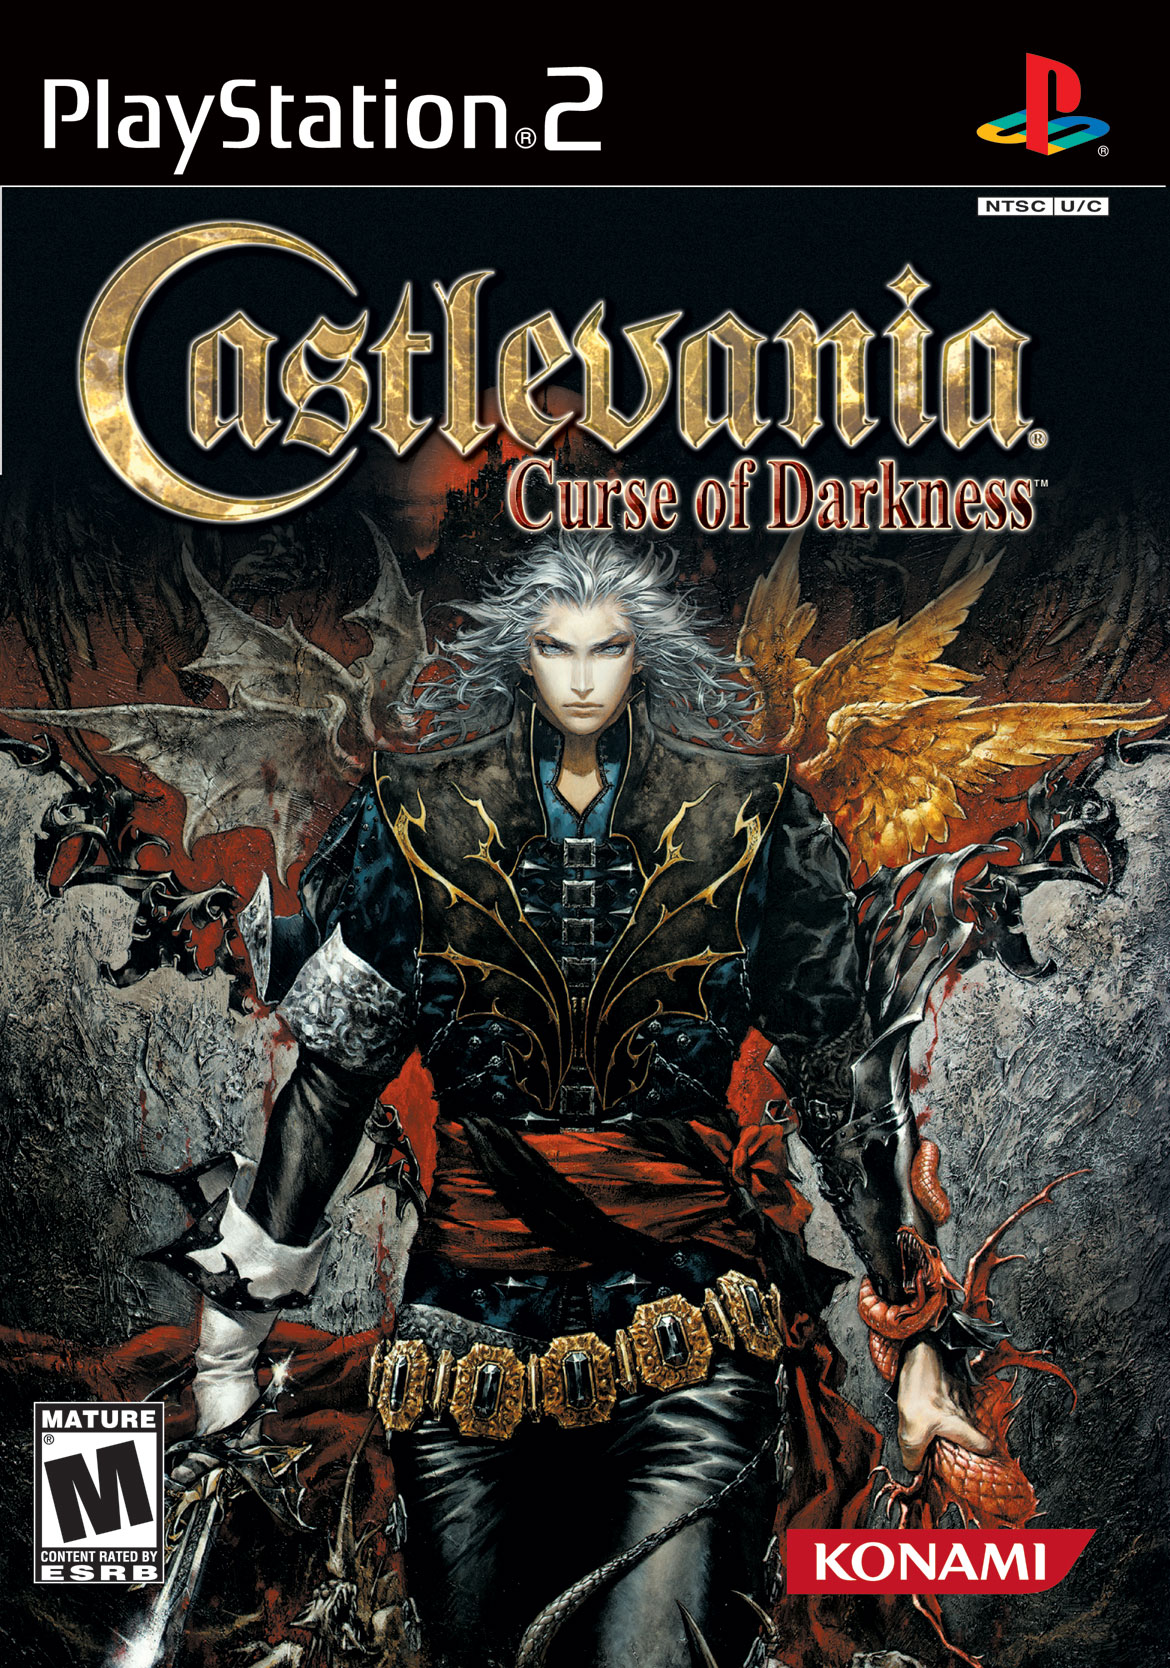 list of castlevania games by year